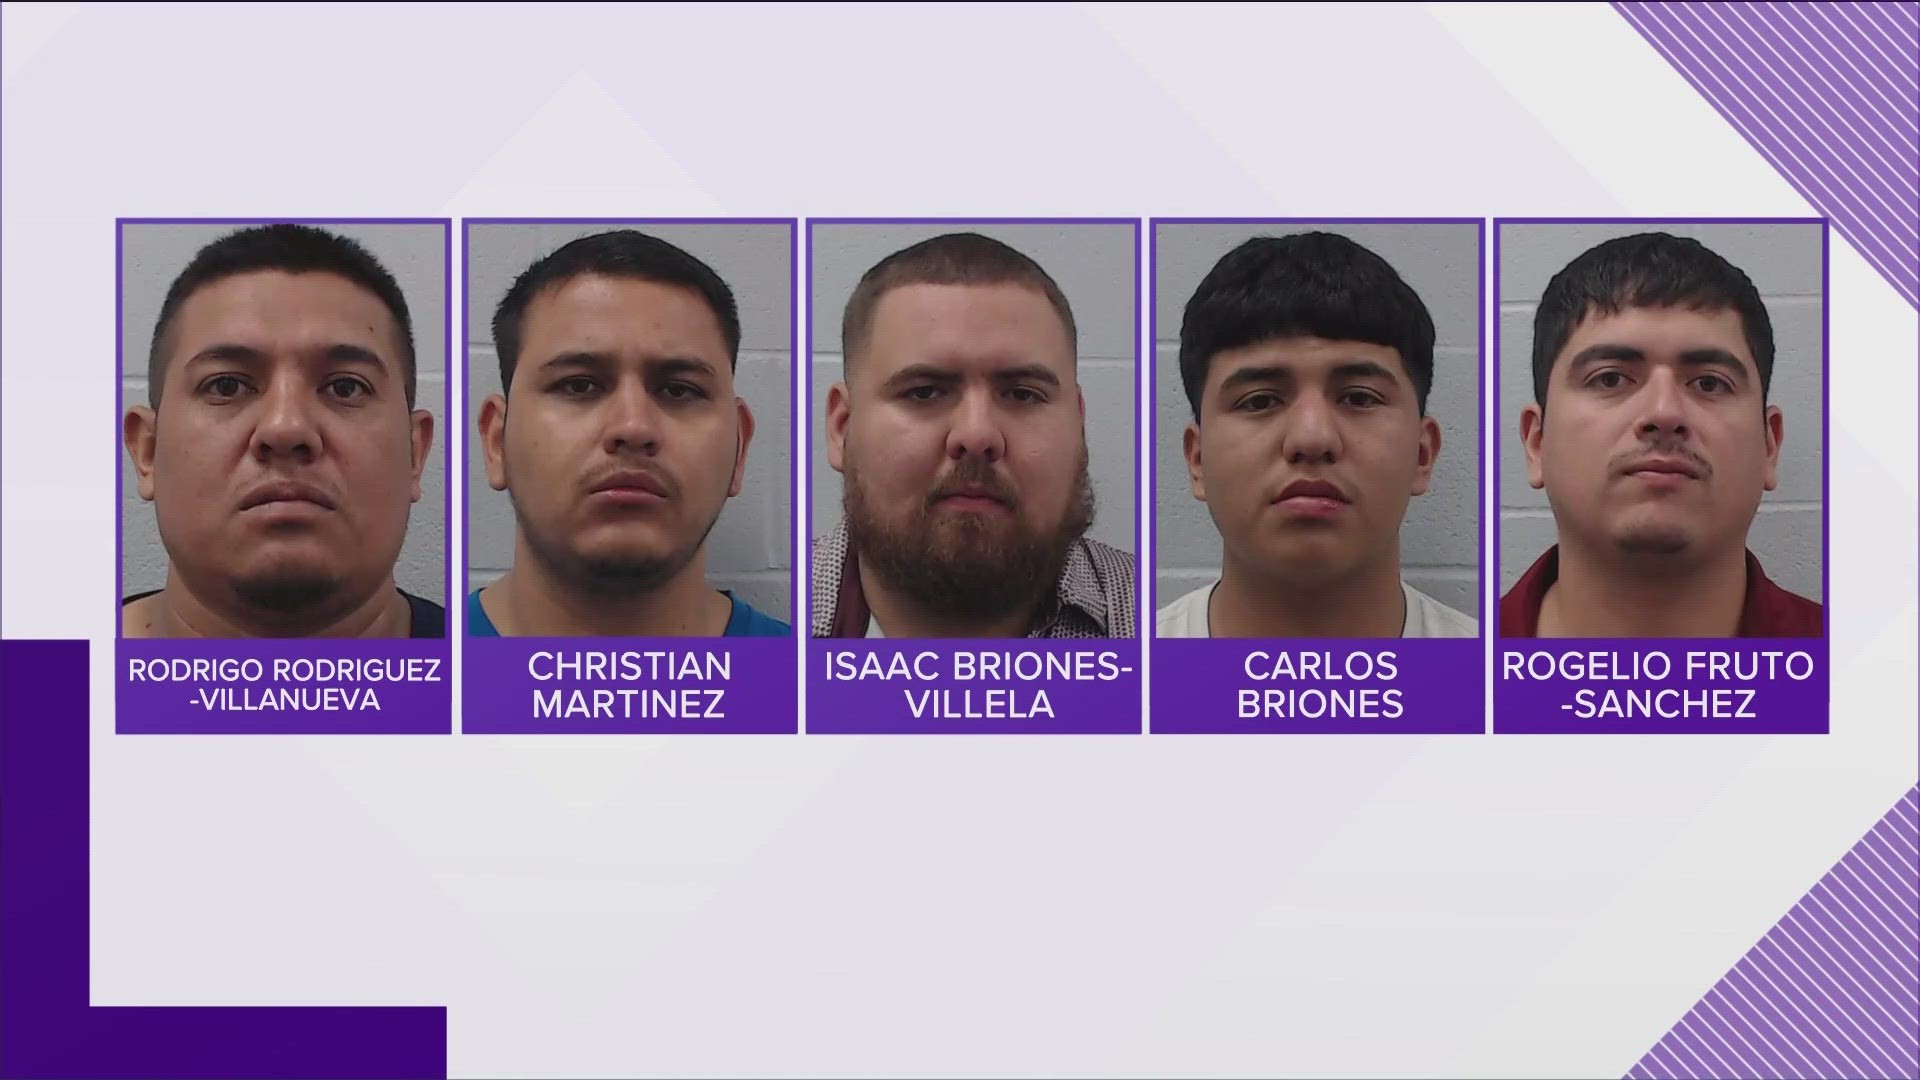 Law enforcement officers in Hays County say they are seeing more cases of human smuggling. The most recent arrests happened in Kyle.